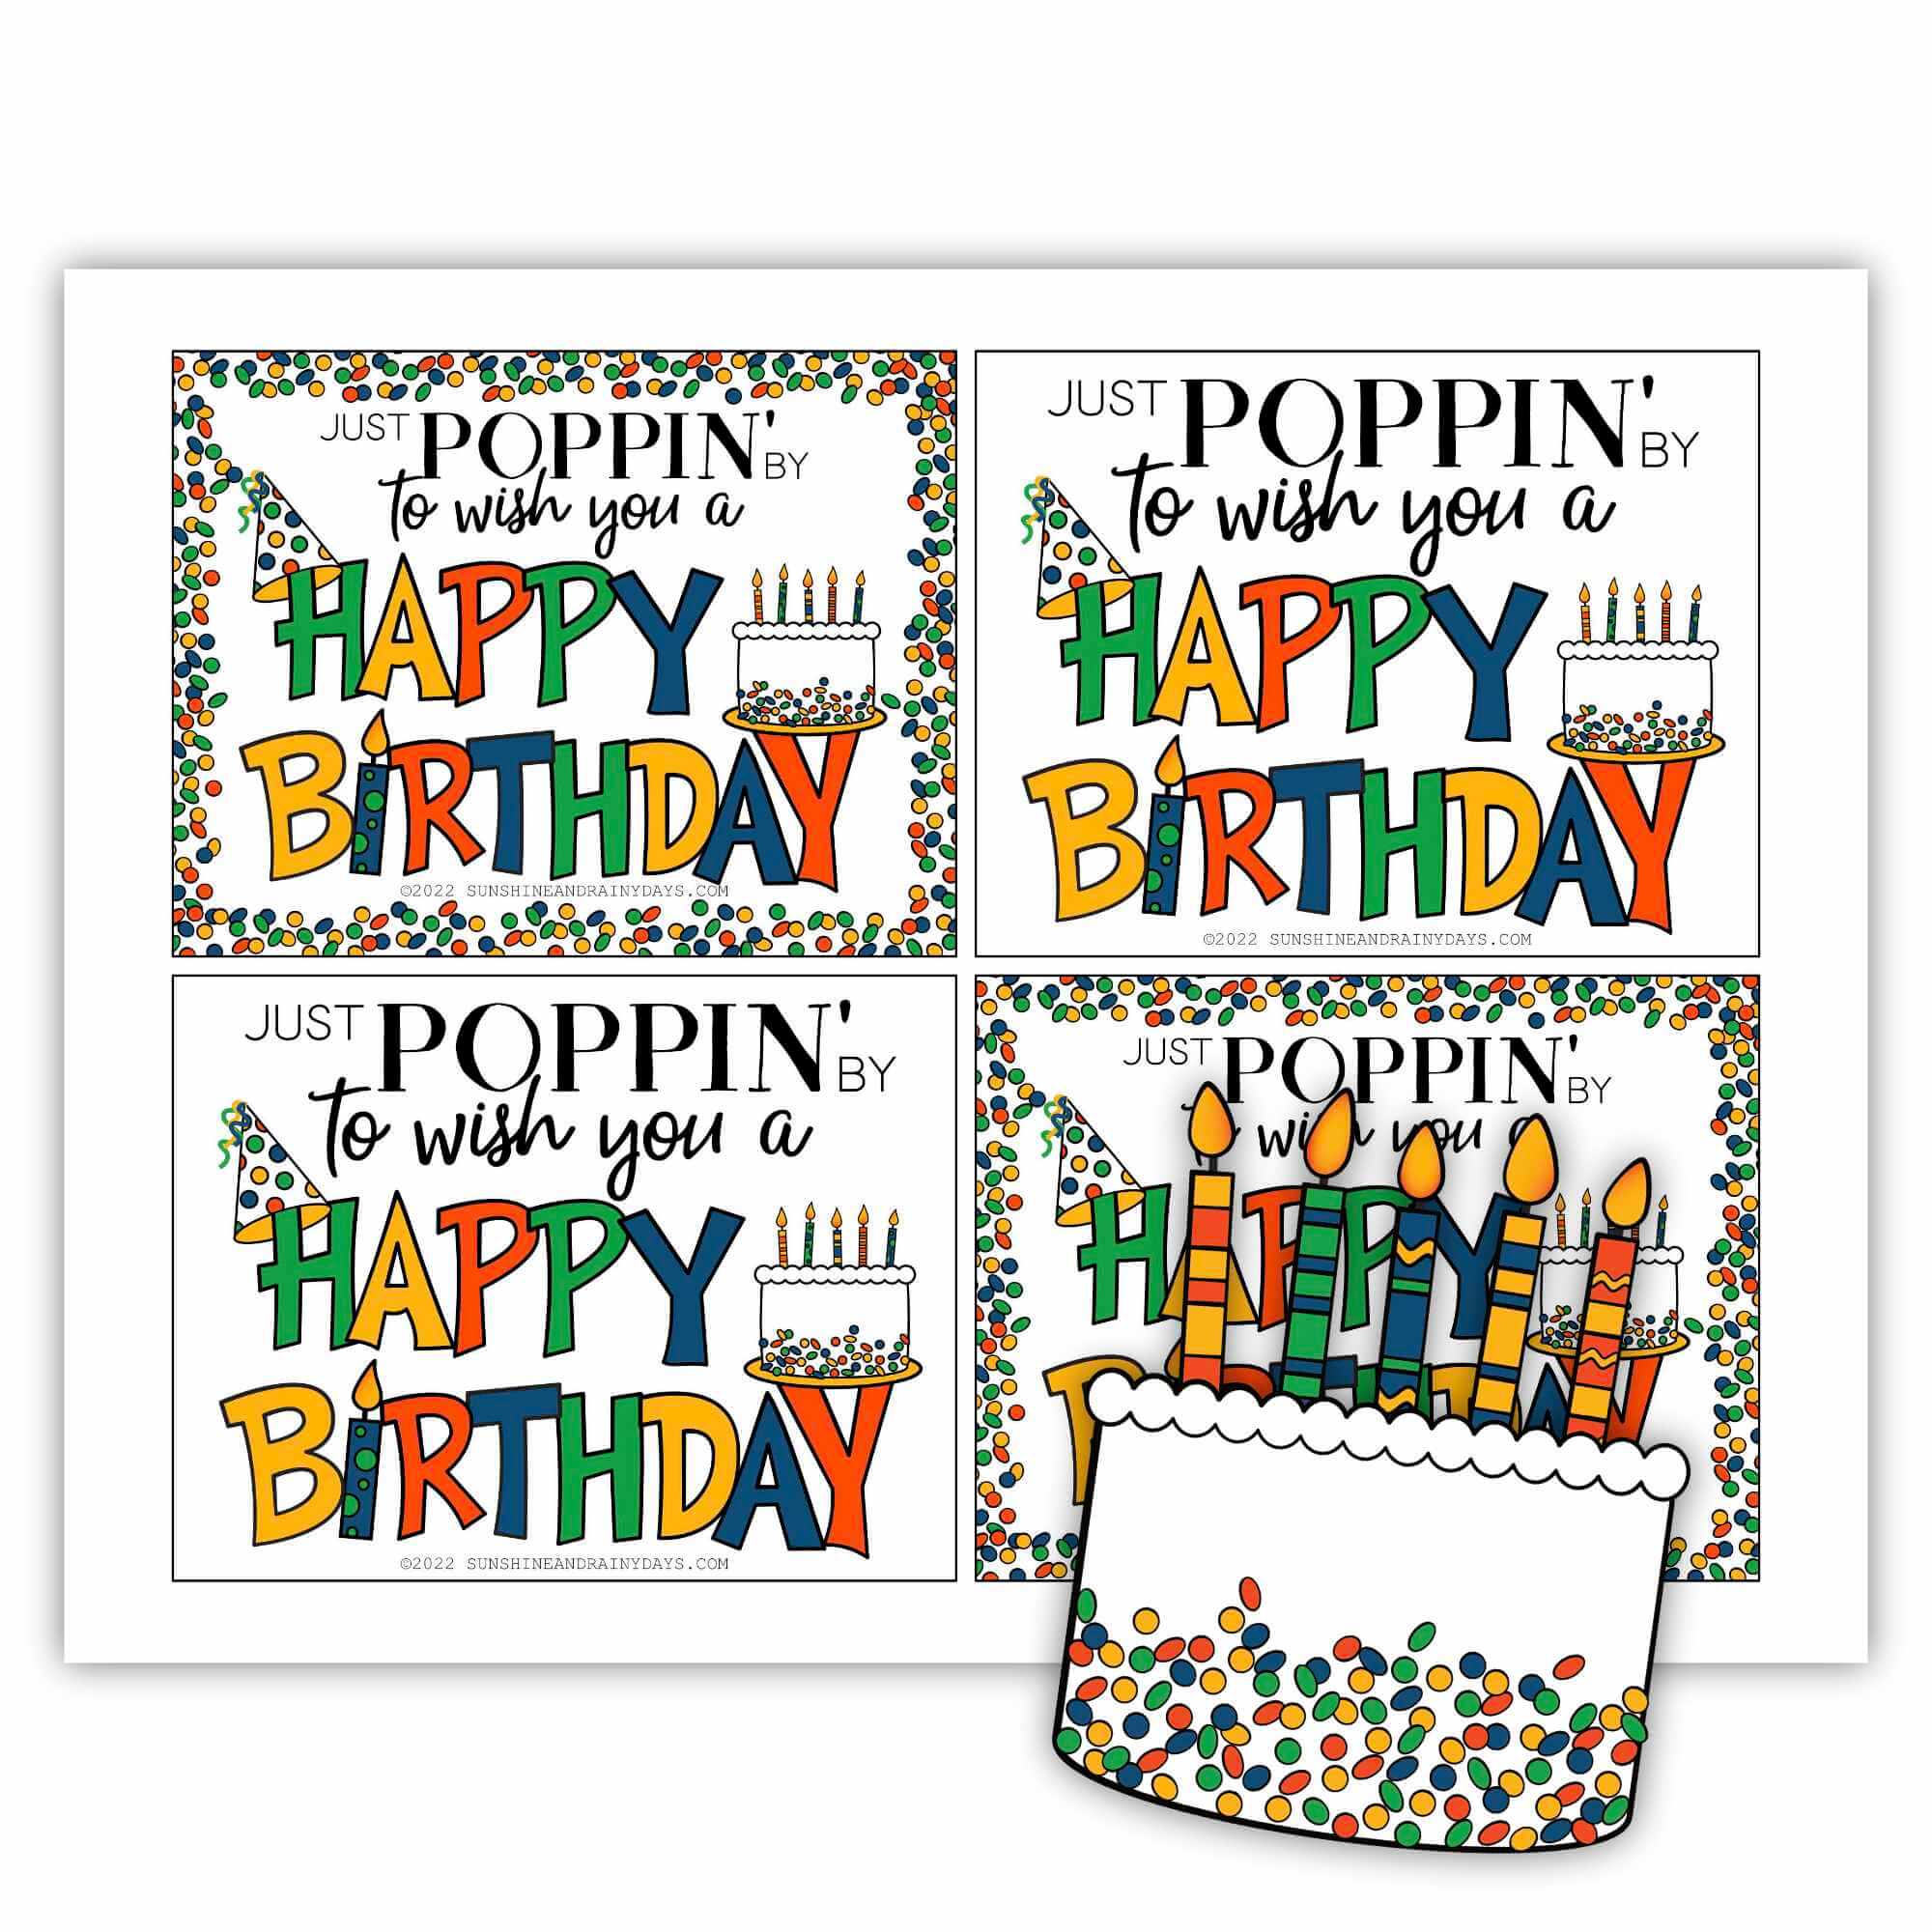 Just Poppin' By To Wish You A Happy Birthday microwave popcorn tag printable.